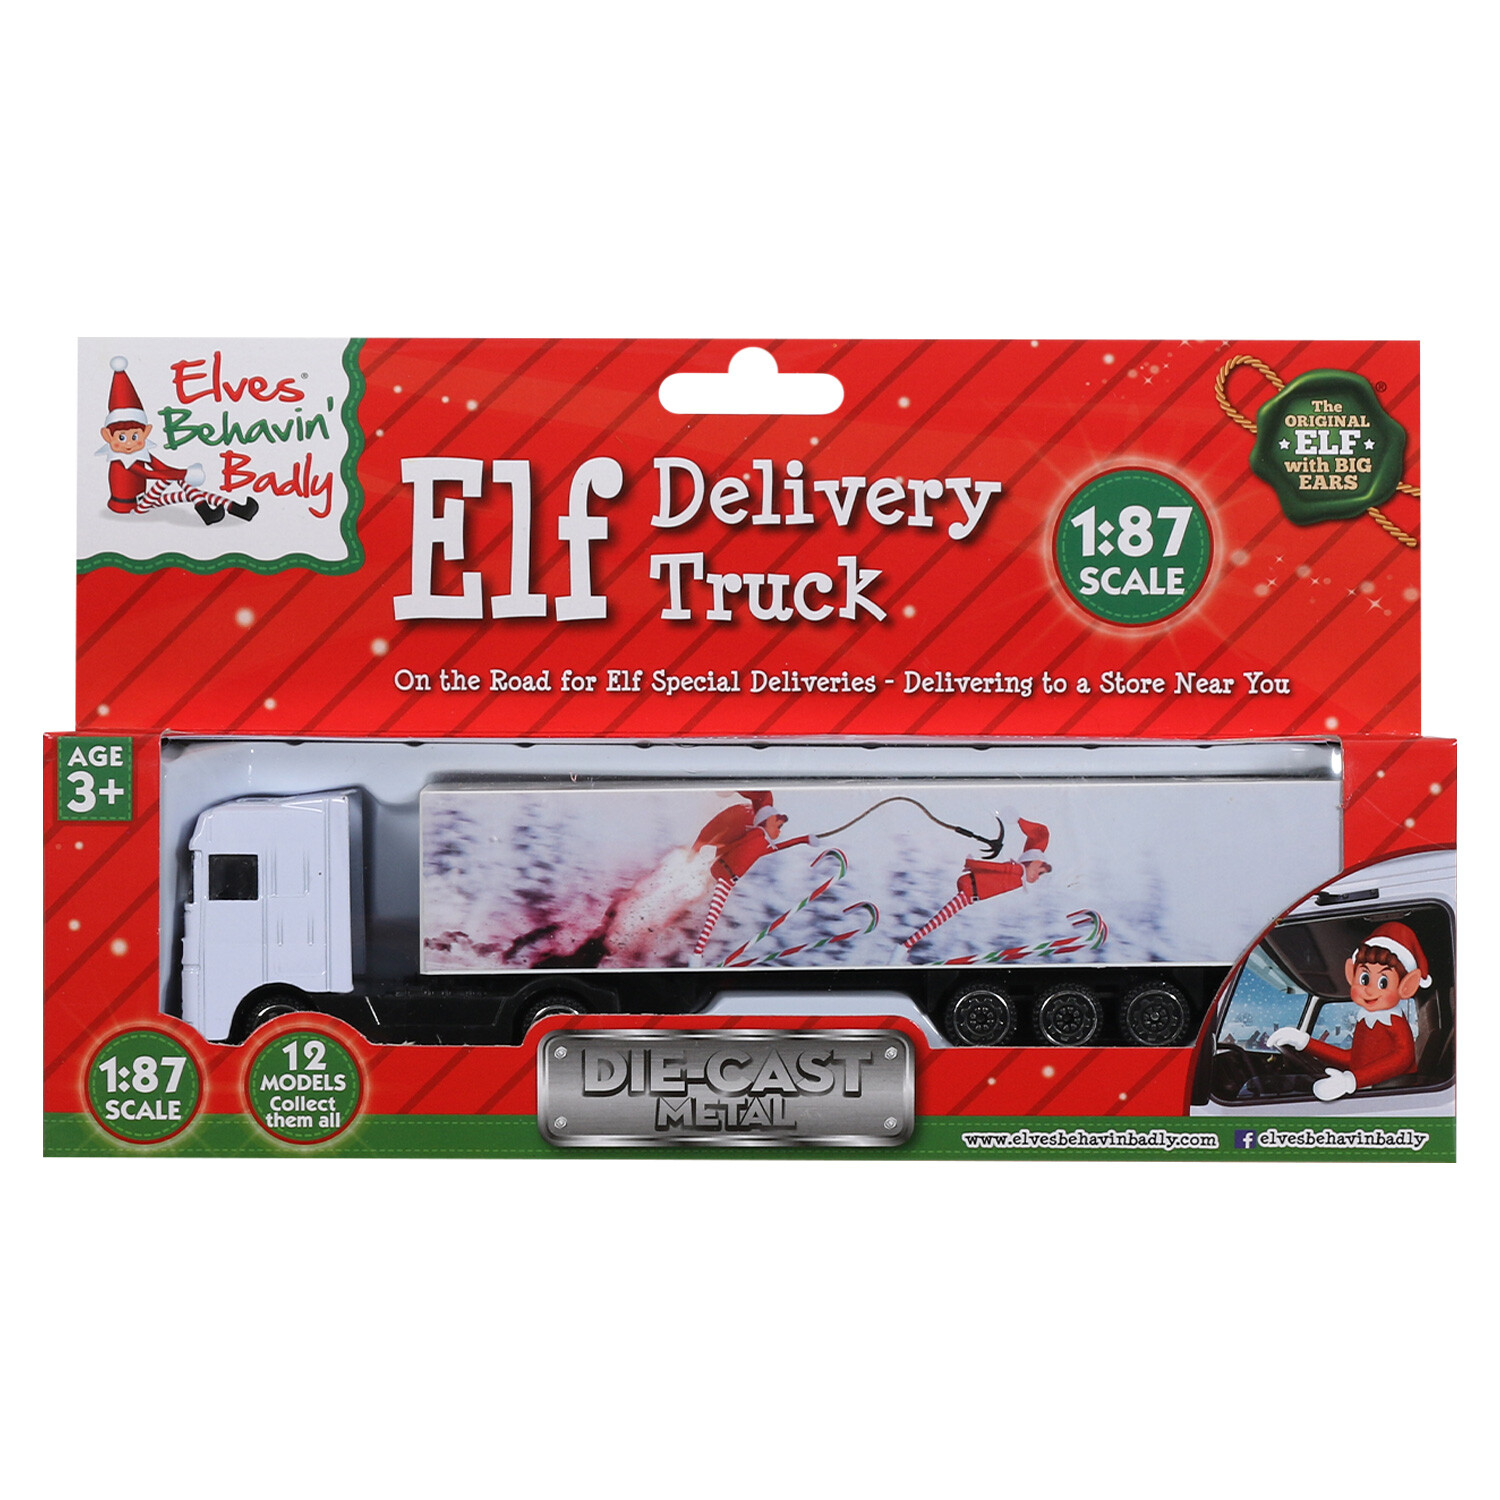 Elf Delivery Truck Image 3